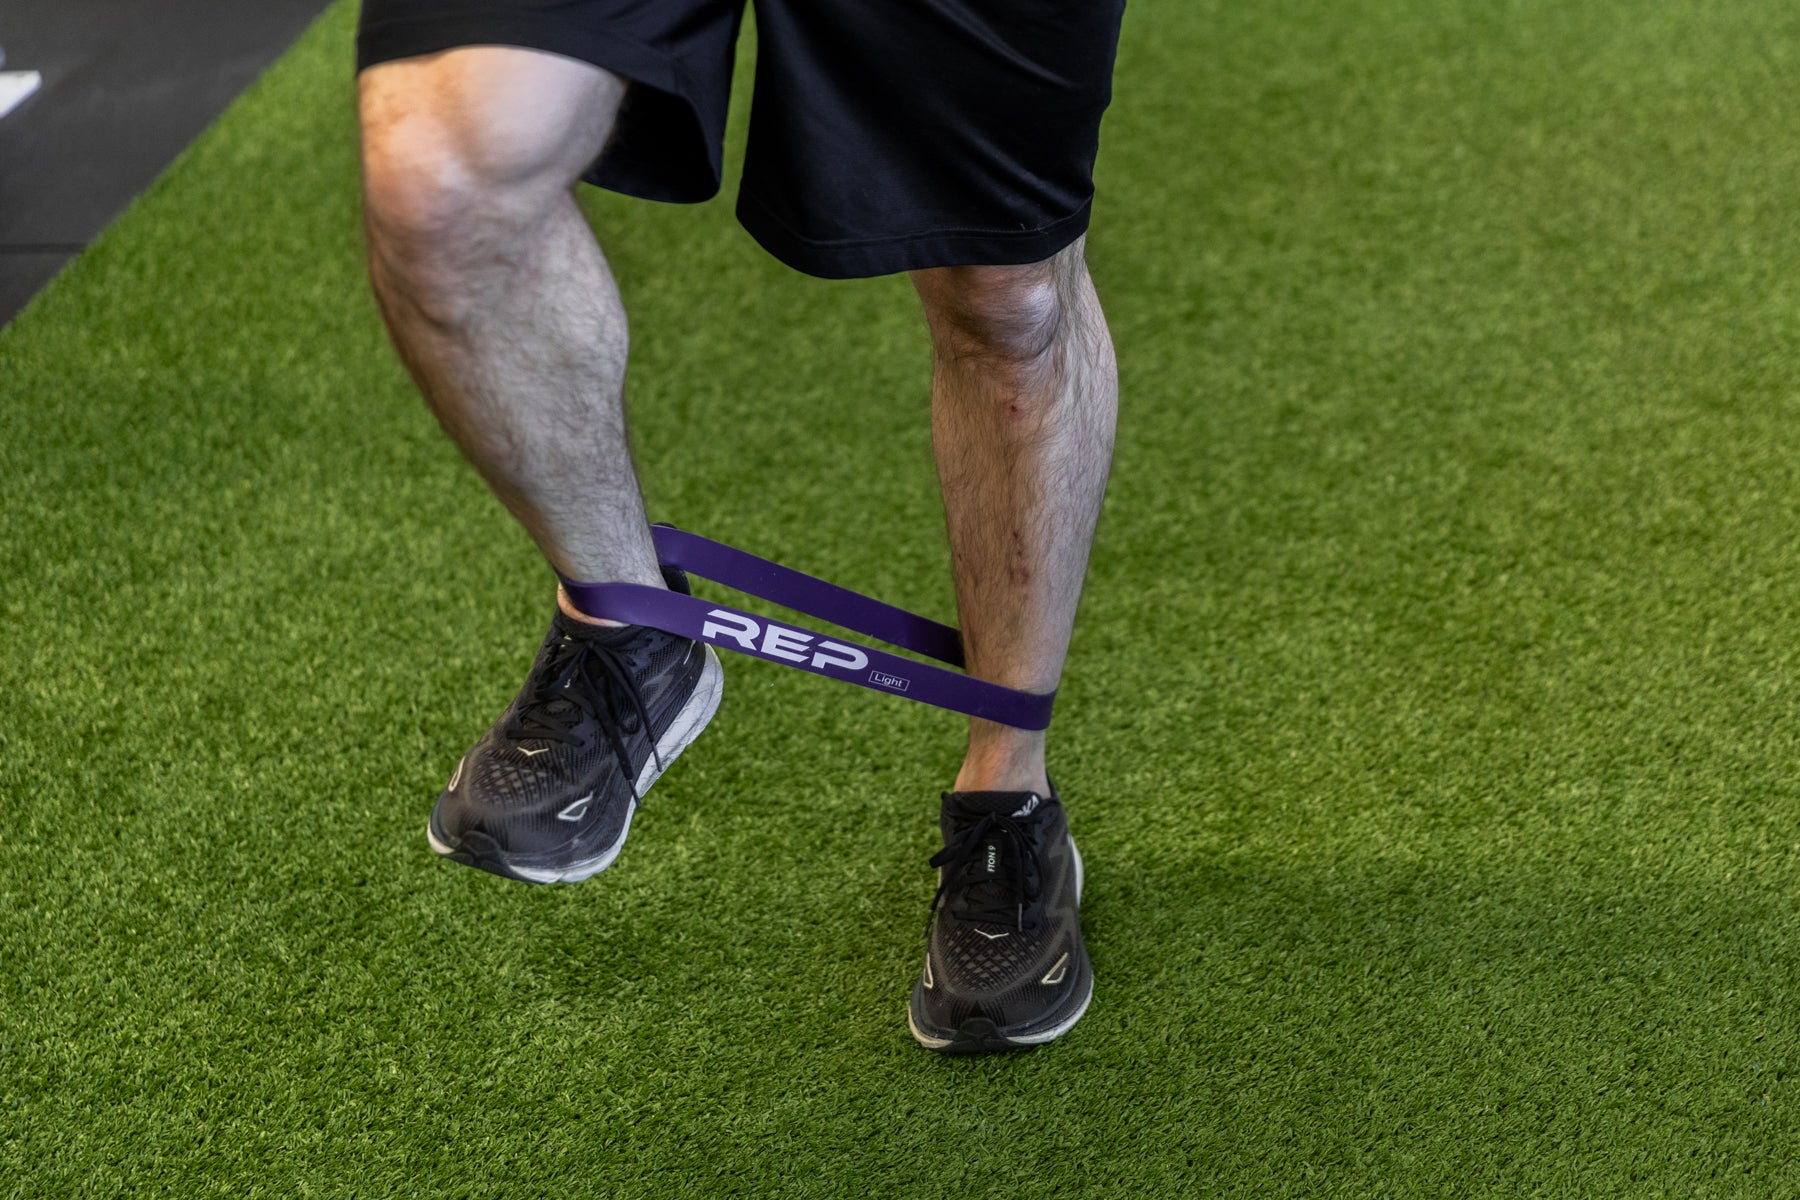 Athlete using a purple short resistance band around his lower leg for agility exercises.